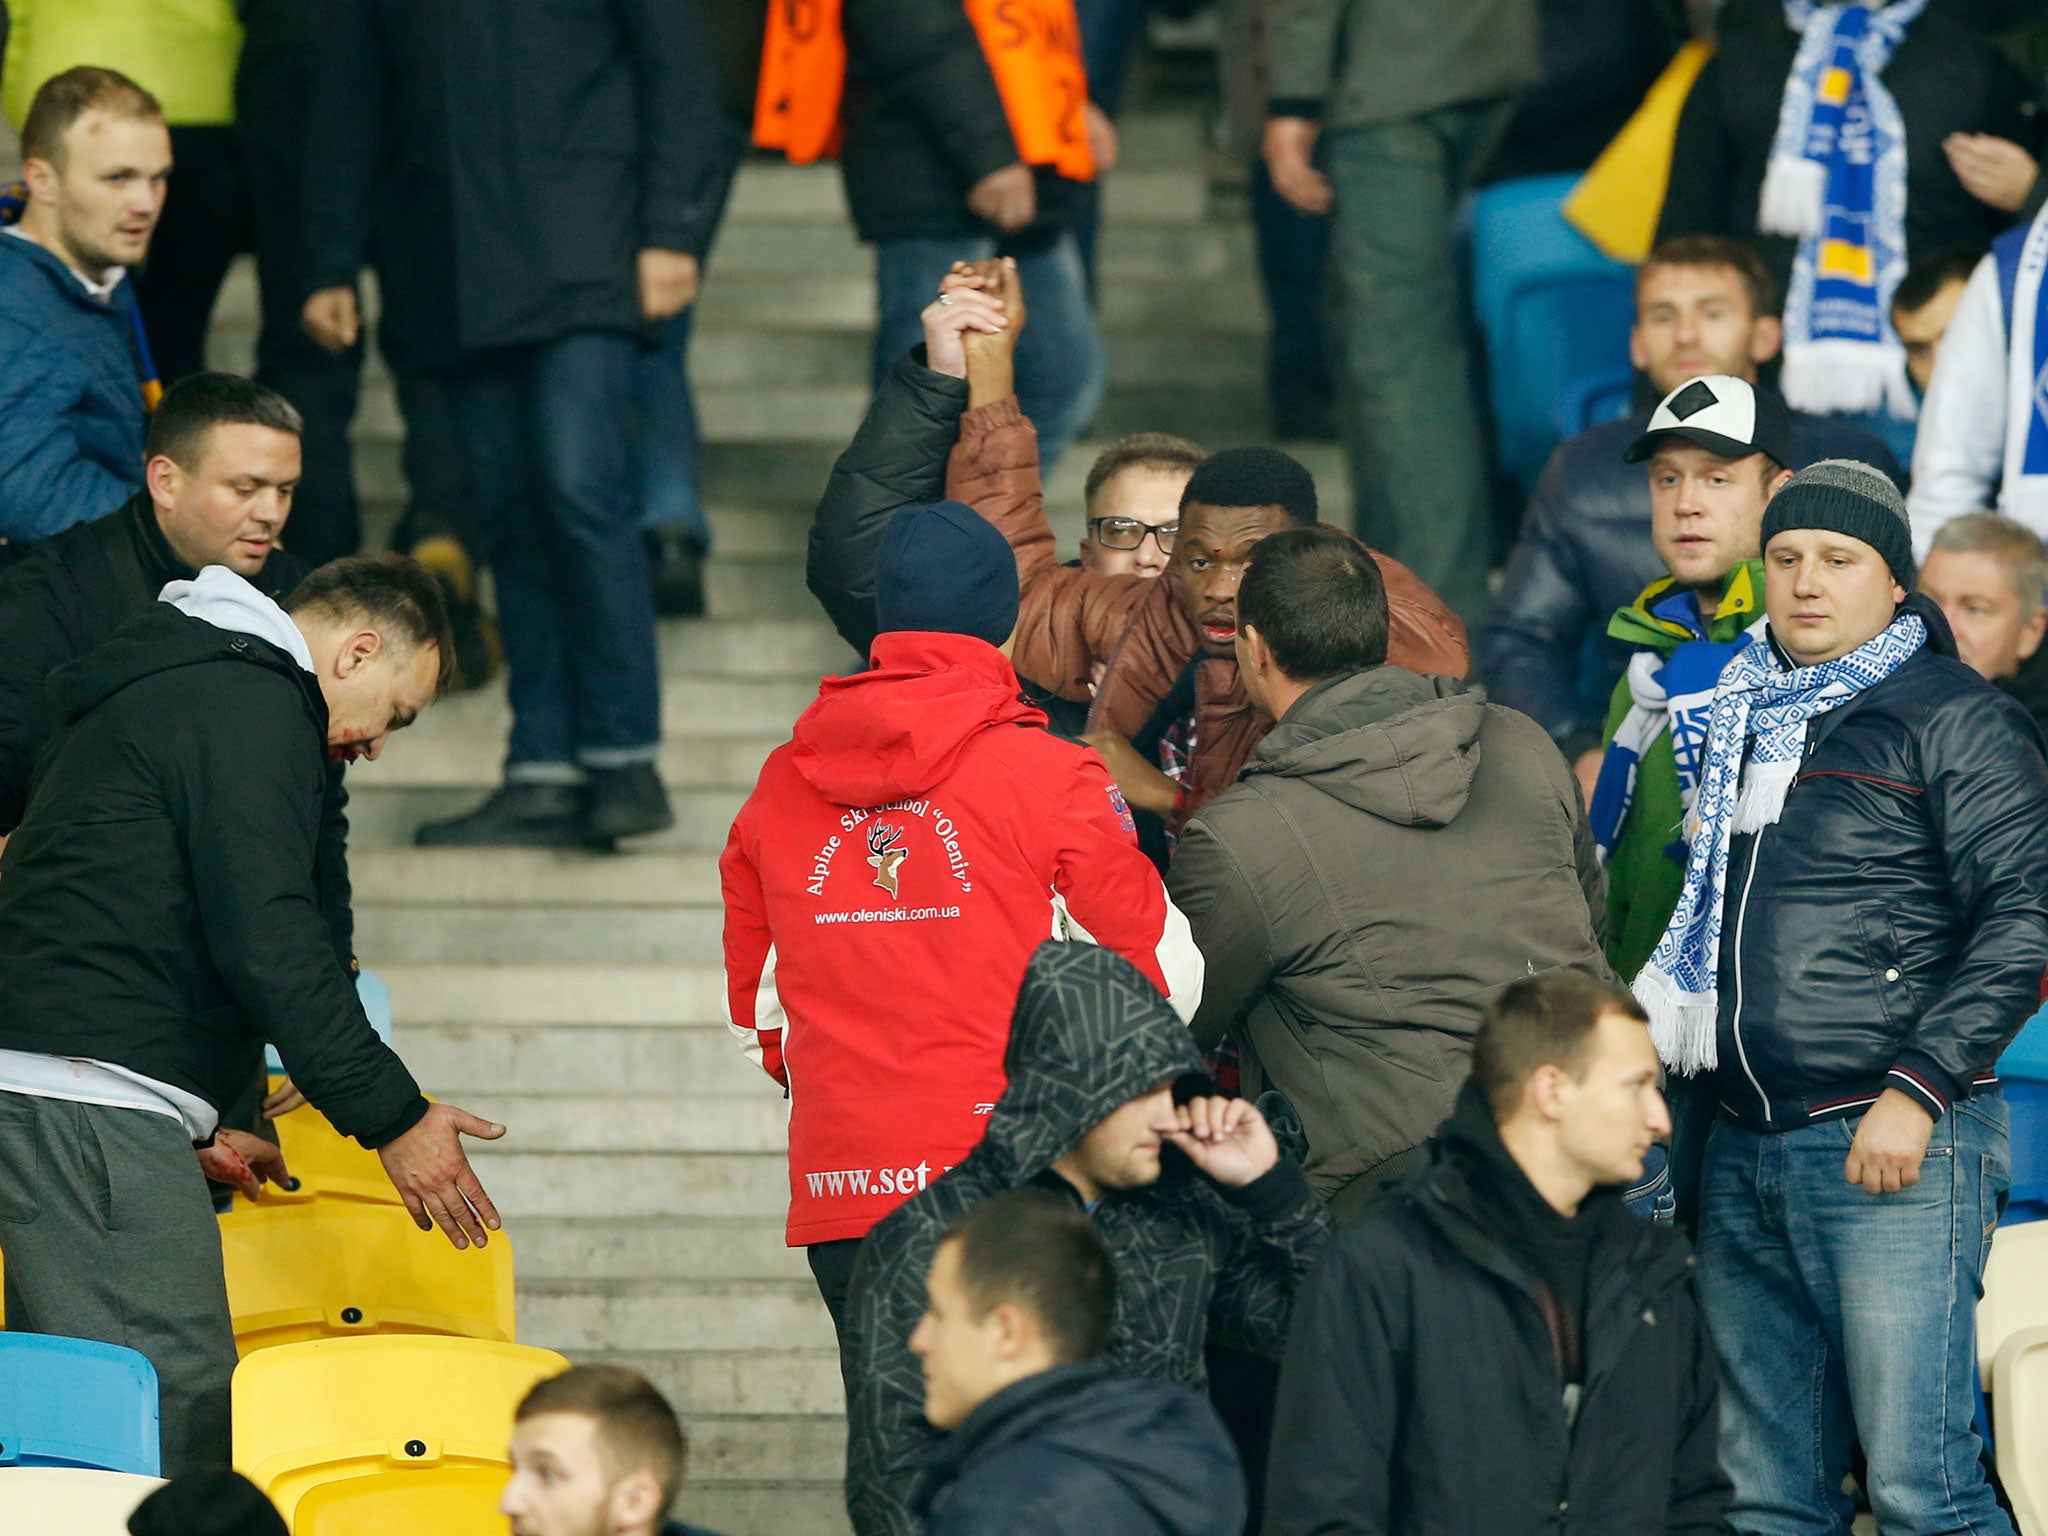 A black man tries to flee the stands at the NSK Olimpiysky after being attacked in an apparent racial assault